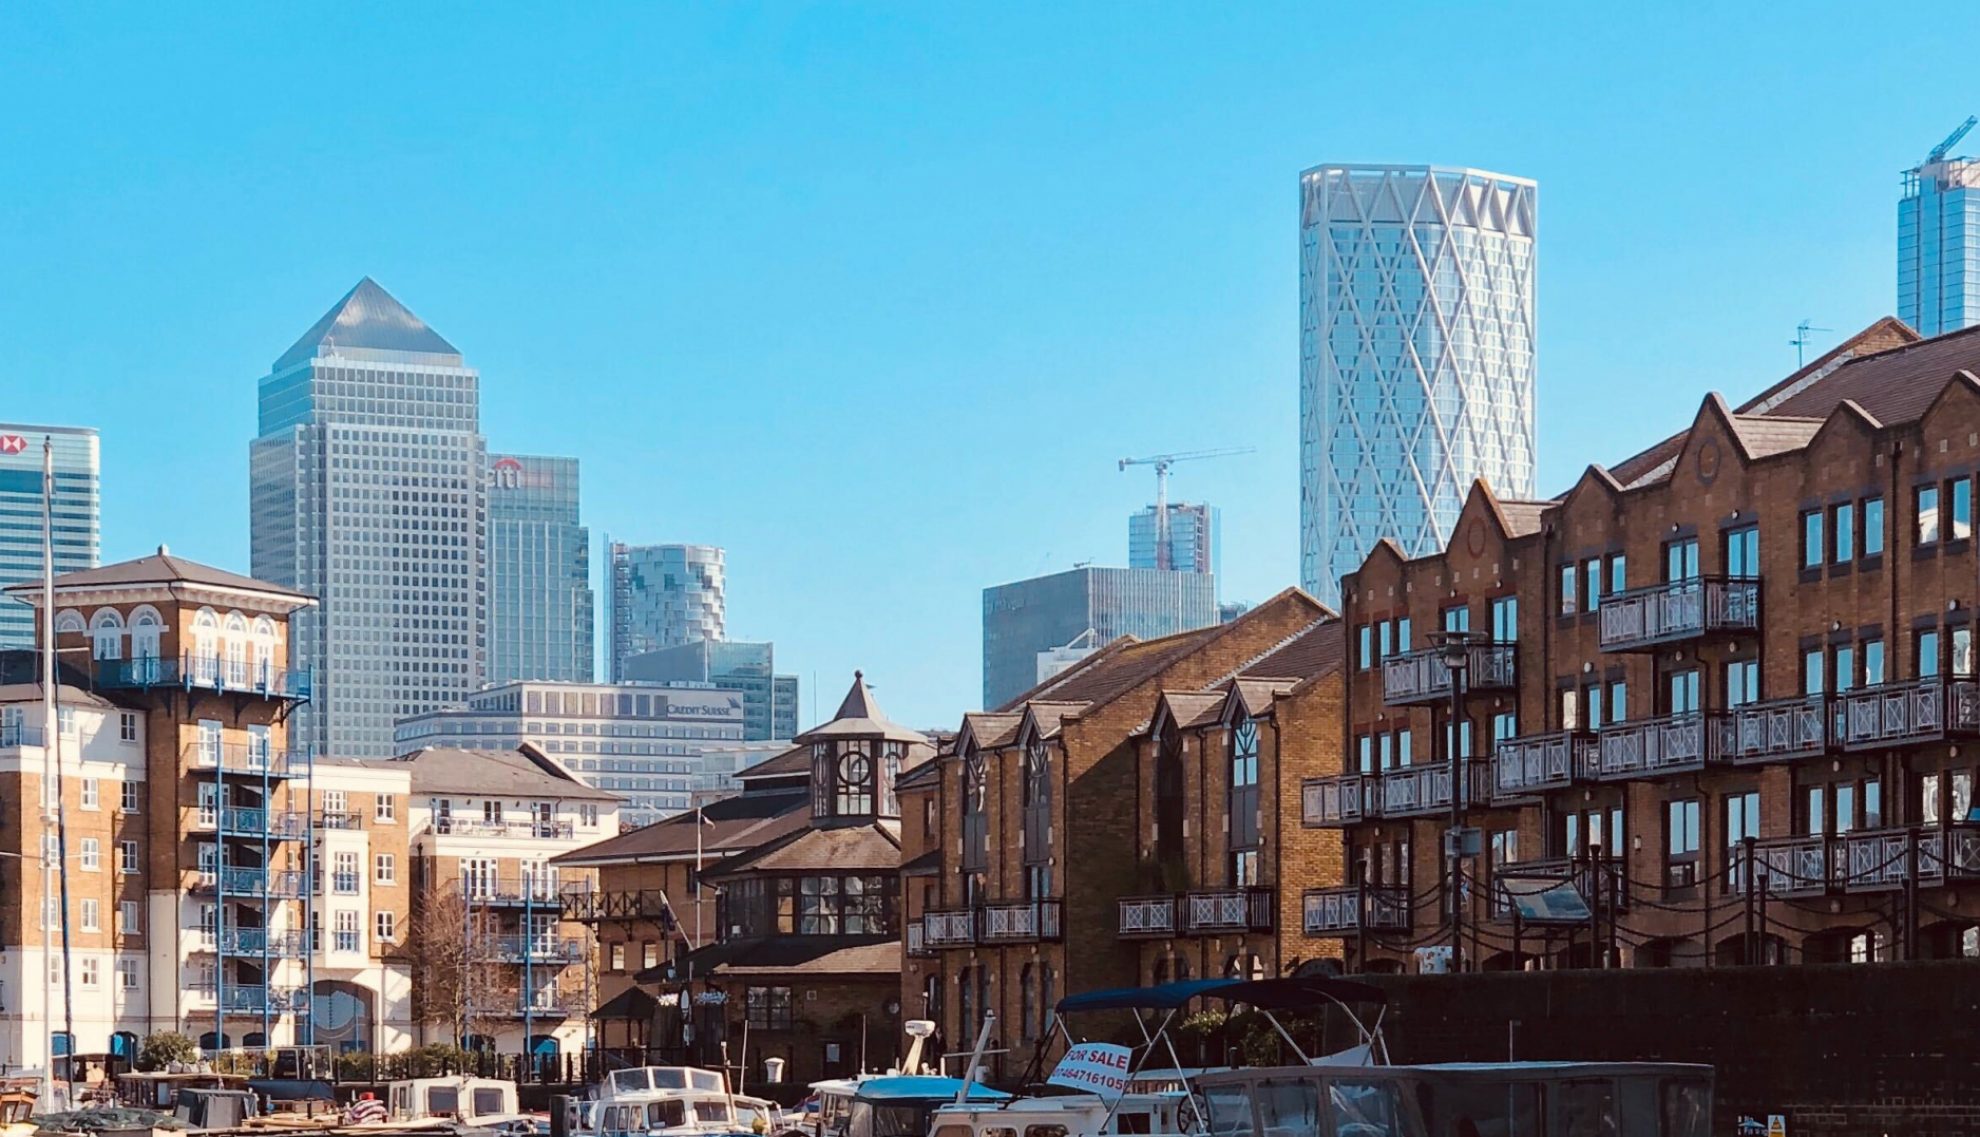 New homes and buildings in Canary Wharf, East London